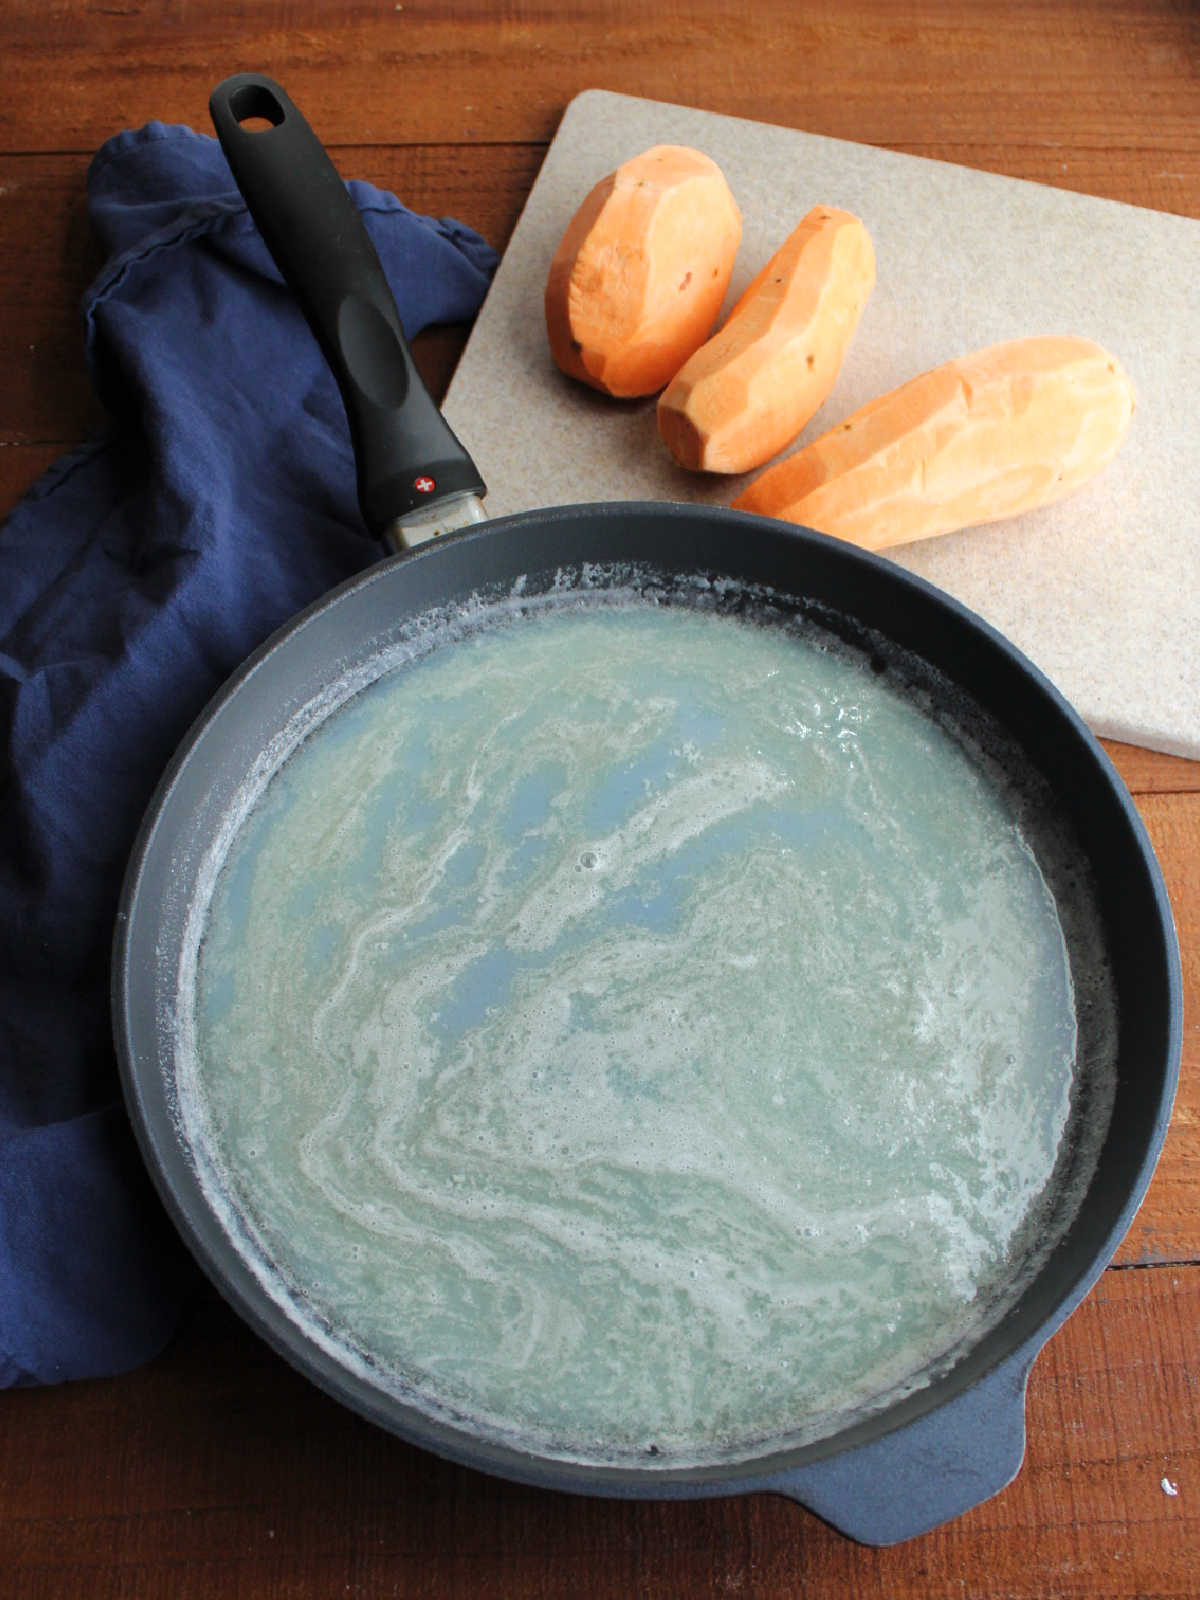 Large skillet with melted butter, sugar, and milk mixture next to peeled sweet potatoes on a cutting board.